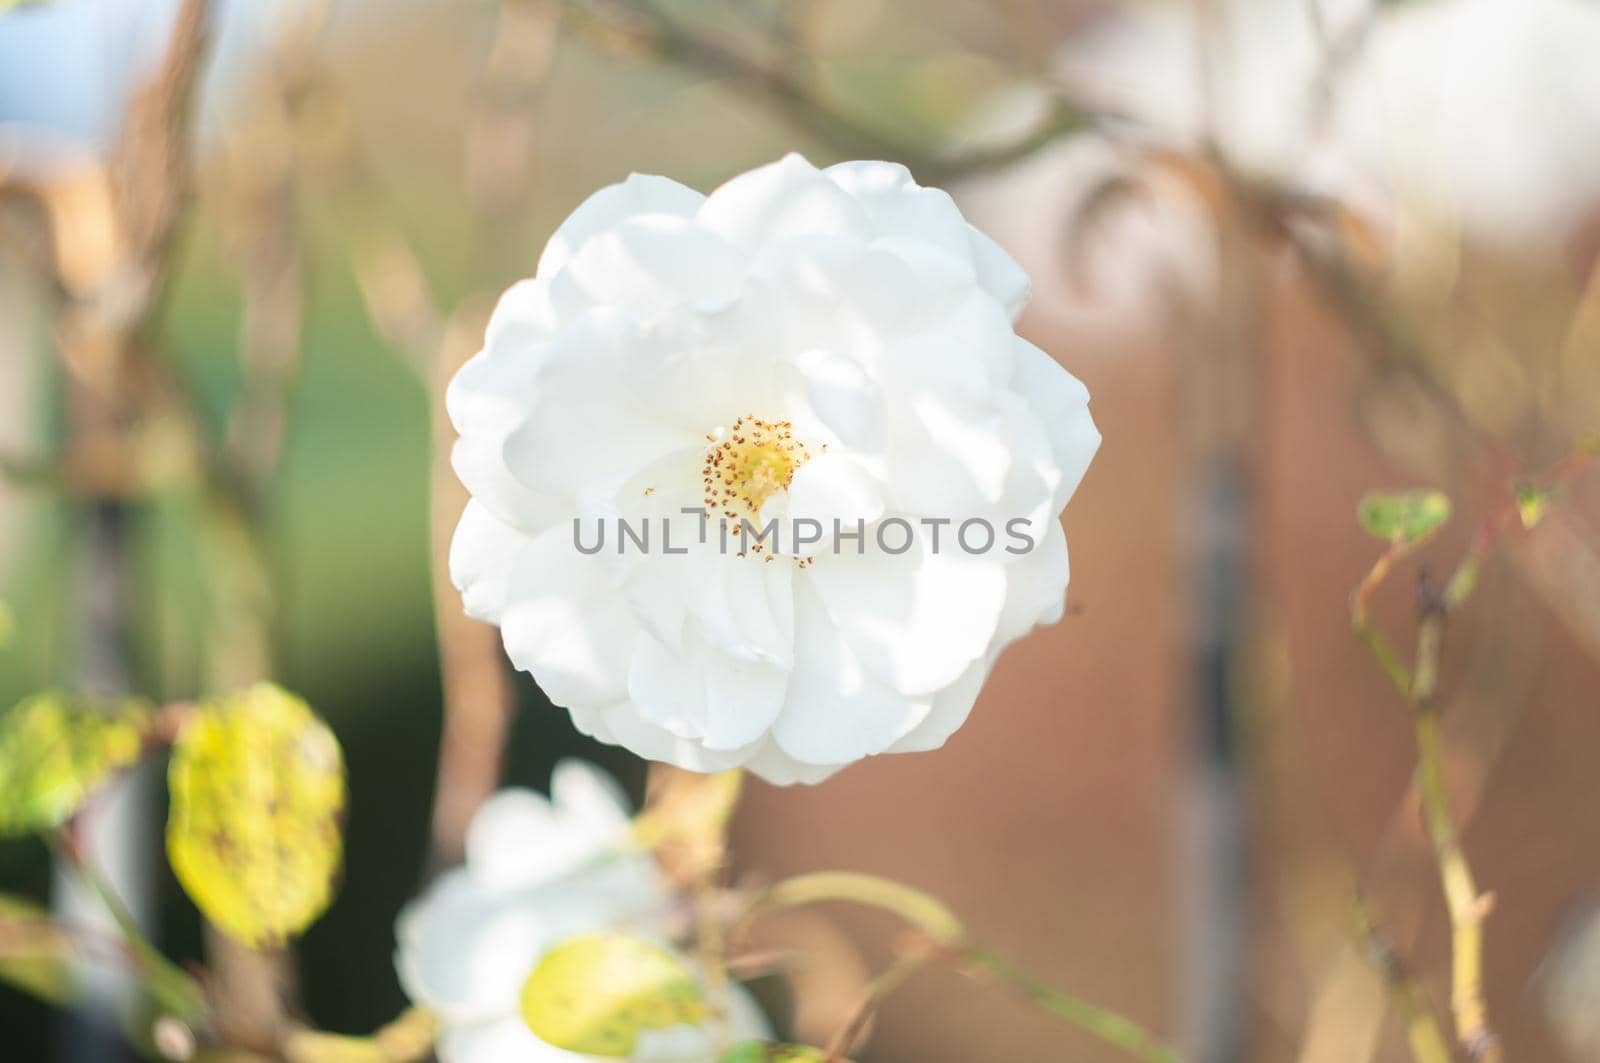 abundantly blooming bush white rose by the fence on the background of house, beautiful floral background. High quality photo